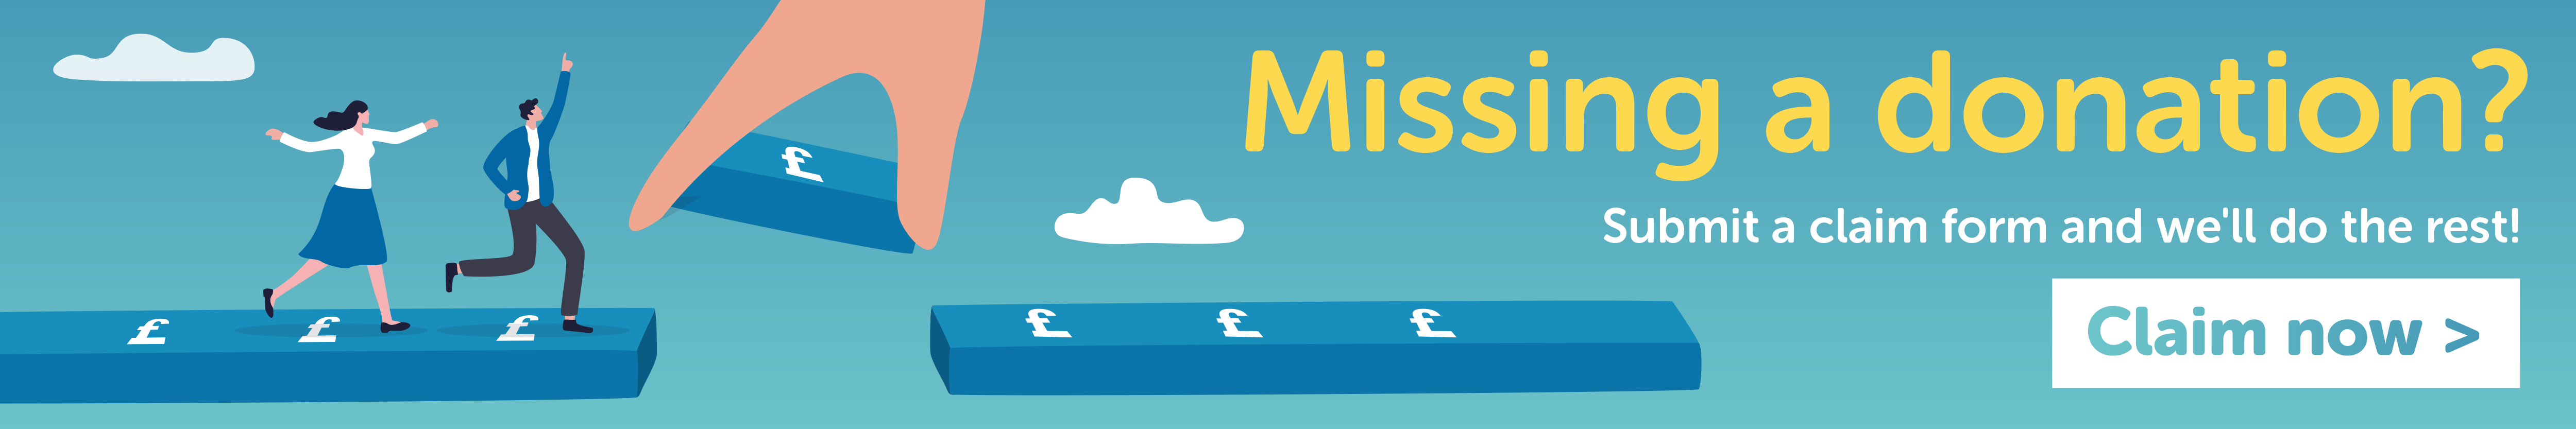 Dashboard - Missing a donation? We can help. Simply submit a claim and we will do the rest.